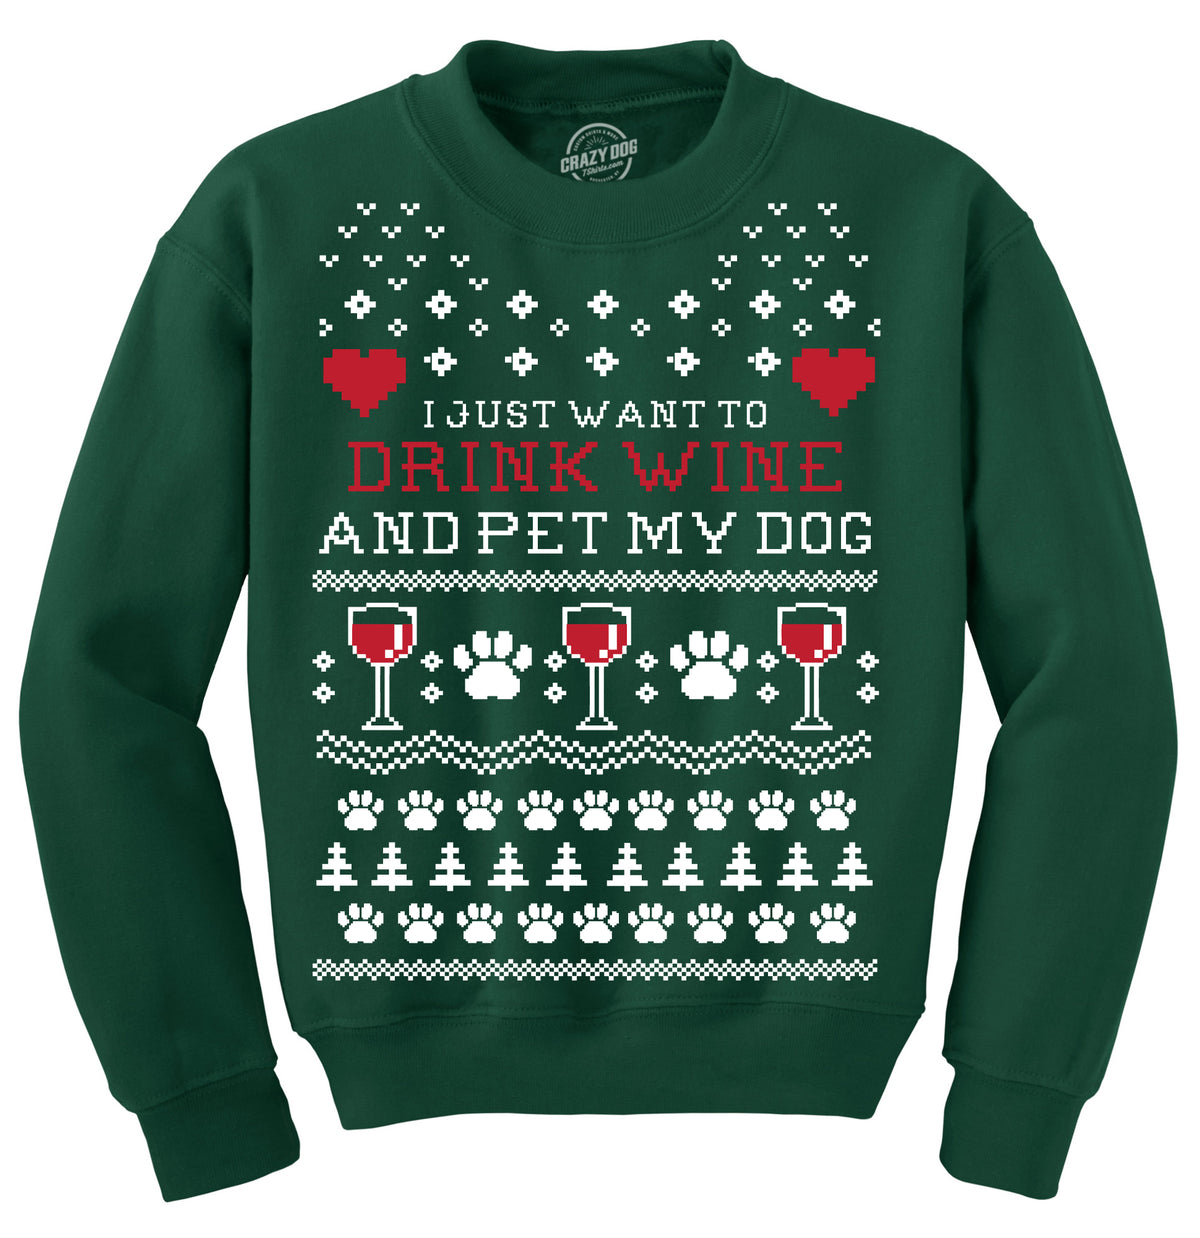 Funny Green I Just Want To Drink Wine and Pet My Dog Sweatshirt Nerdy Christmas Dog Drinking Ugly Sweater Tee